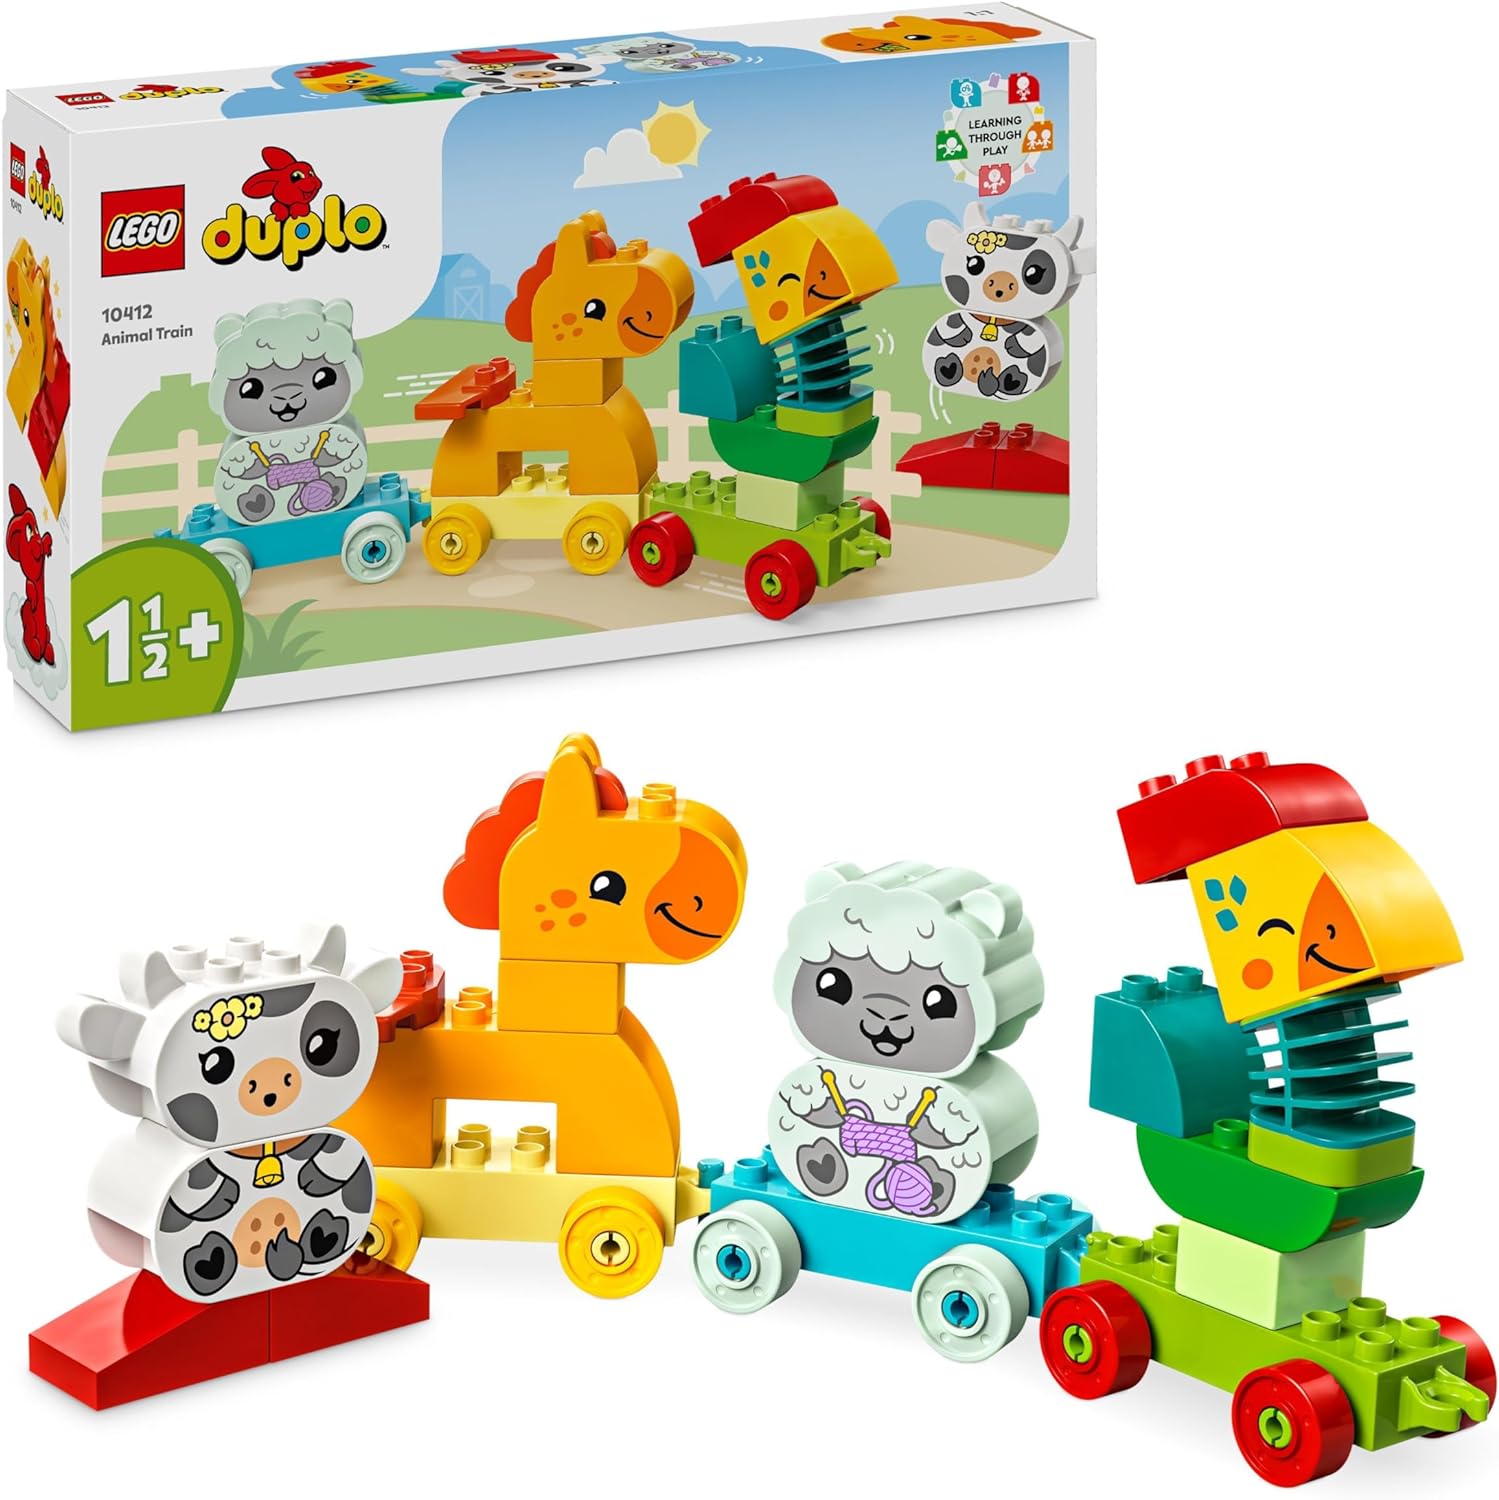 LEGO DUPLO Animal Train Toy with Wheels, Creative Animal Figures for Building and Converting, Educational Toy for Toddlers, Birthday Gift for Animals Loving Girls and Boys from 1 ½ Years 10412